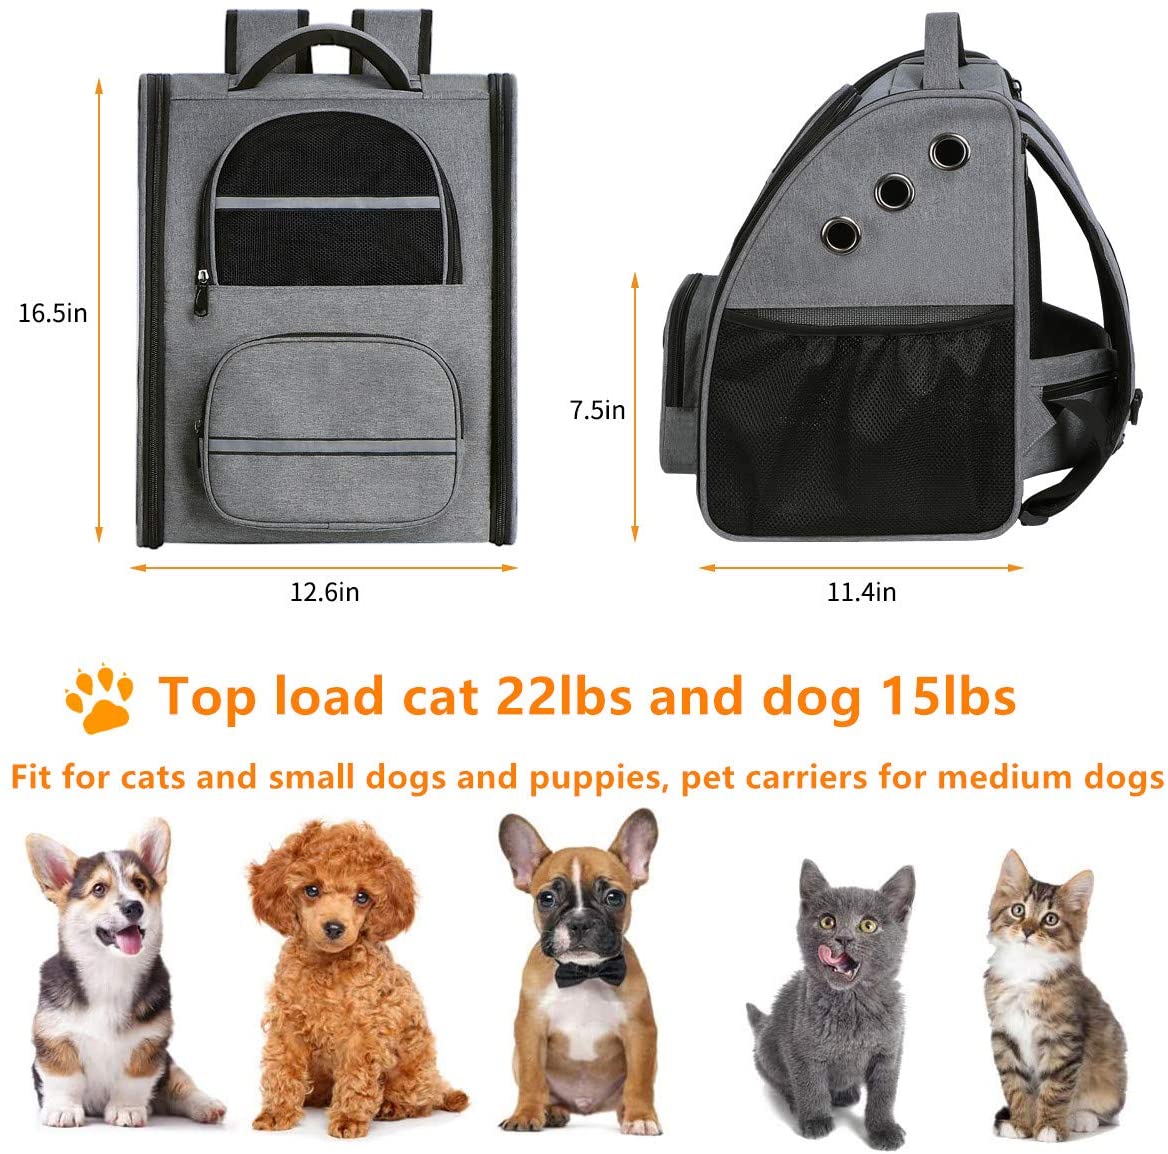 Trapezoid pet backpack